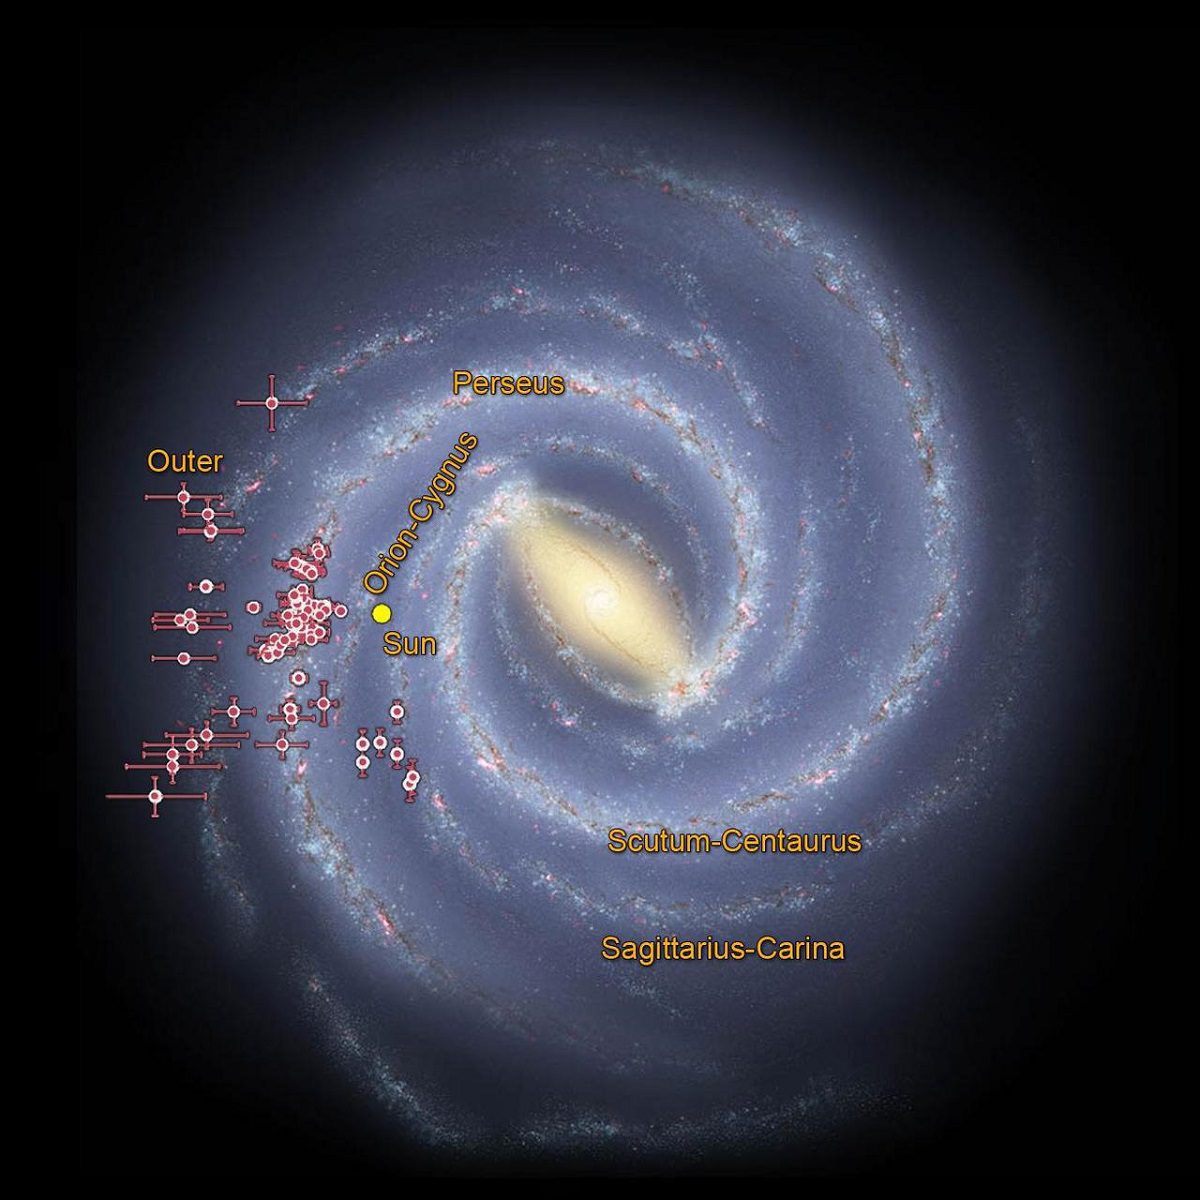 Tracing the arms of our milky way galaxy - NASA photos on Silver Magazine www.silvermagazine.co.uk